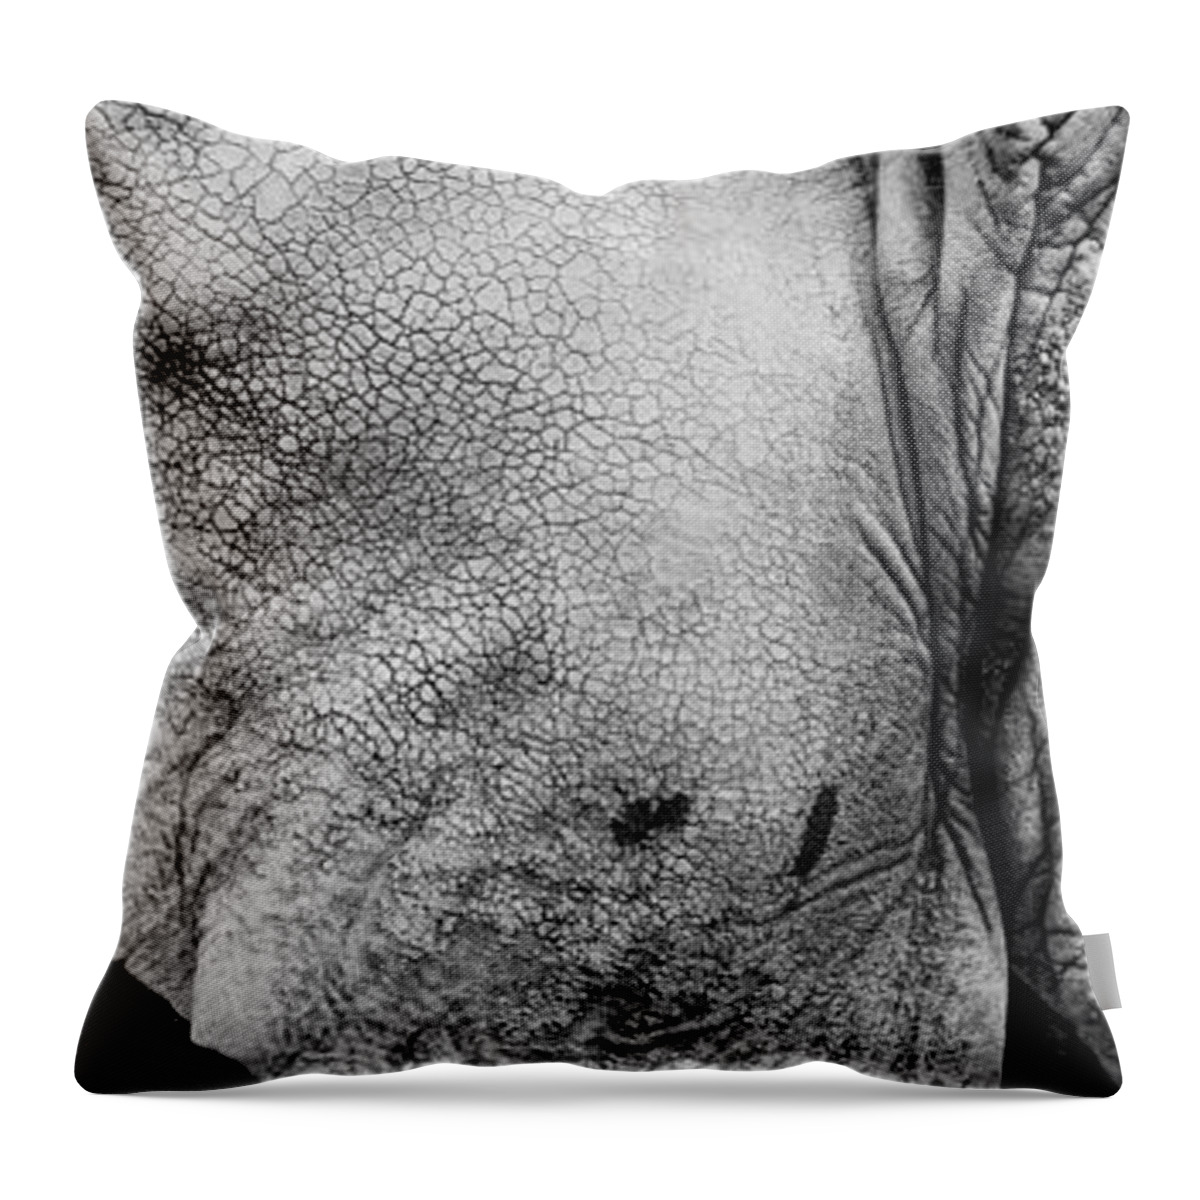 Portrait Throw Pillow featuring the photograph Wrinkles by Joye Ardyn Durham